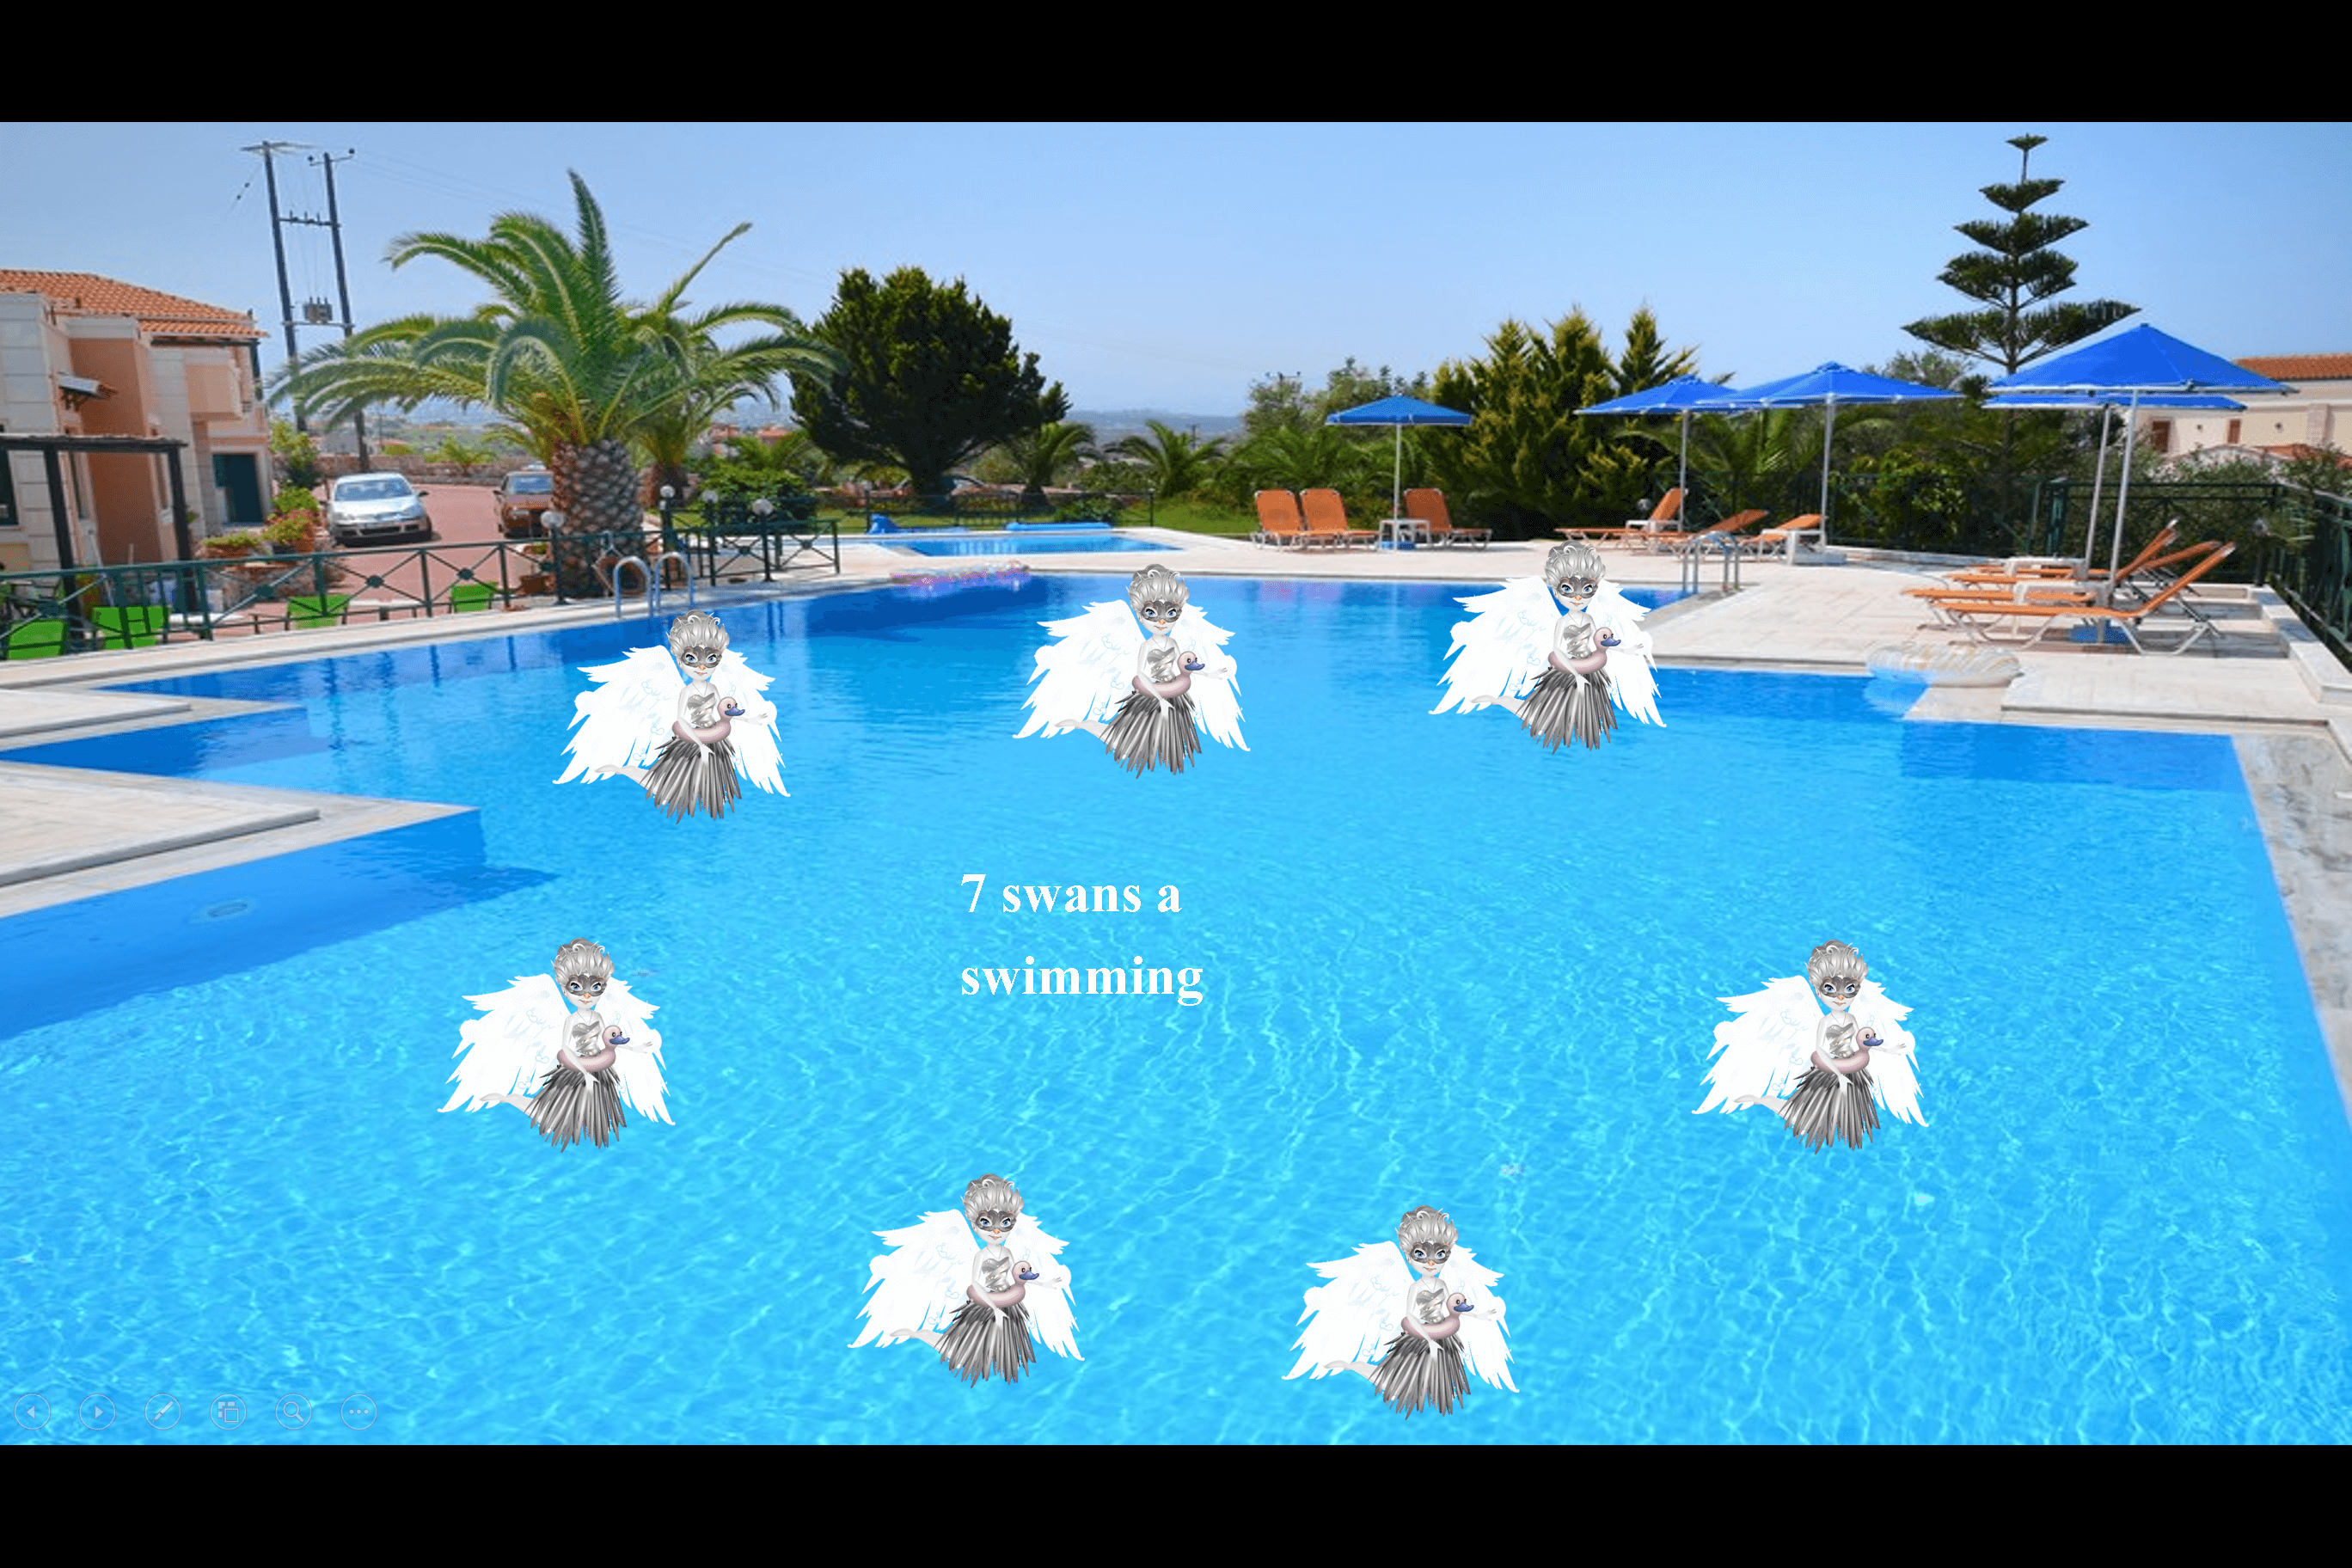 7 swans a swimming